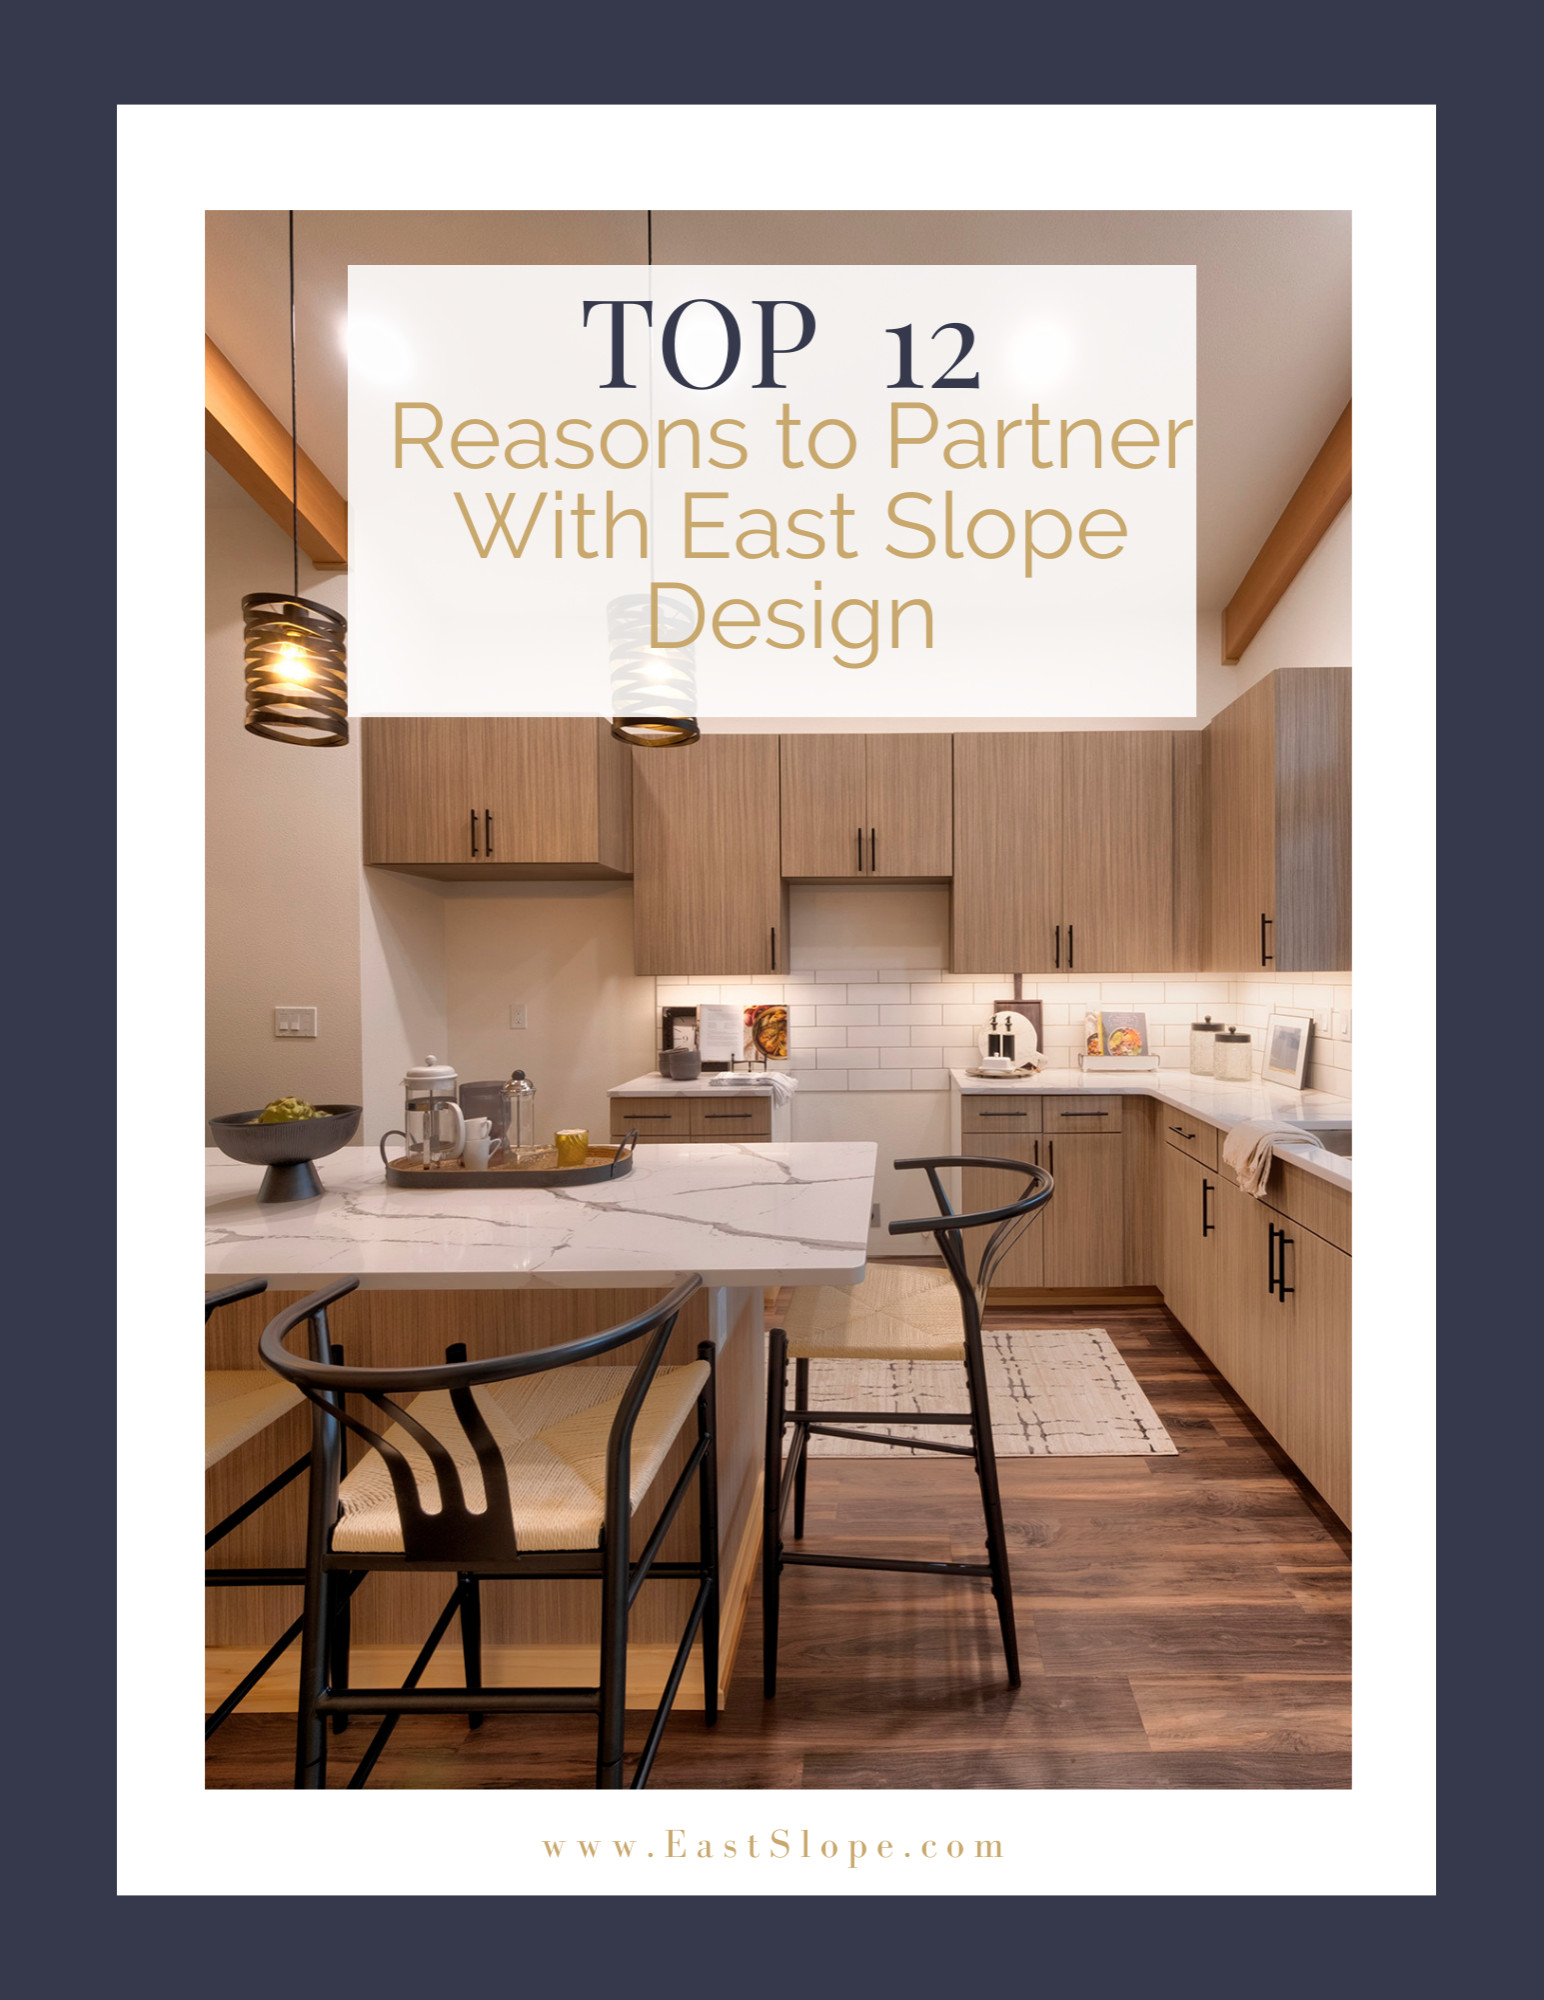 Reasons to Partner With East Slope Design